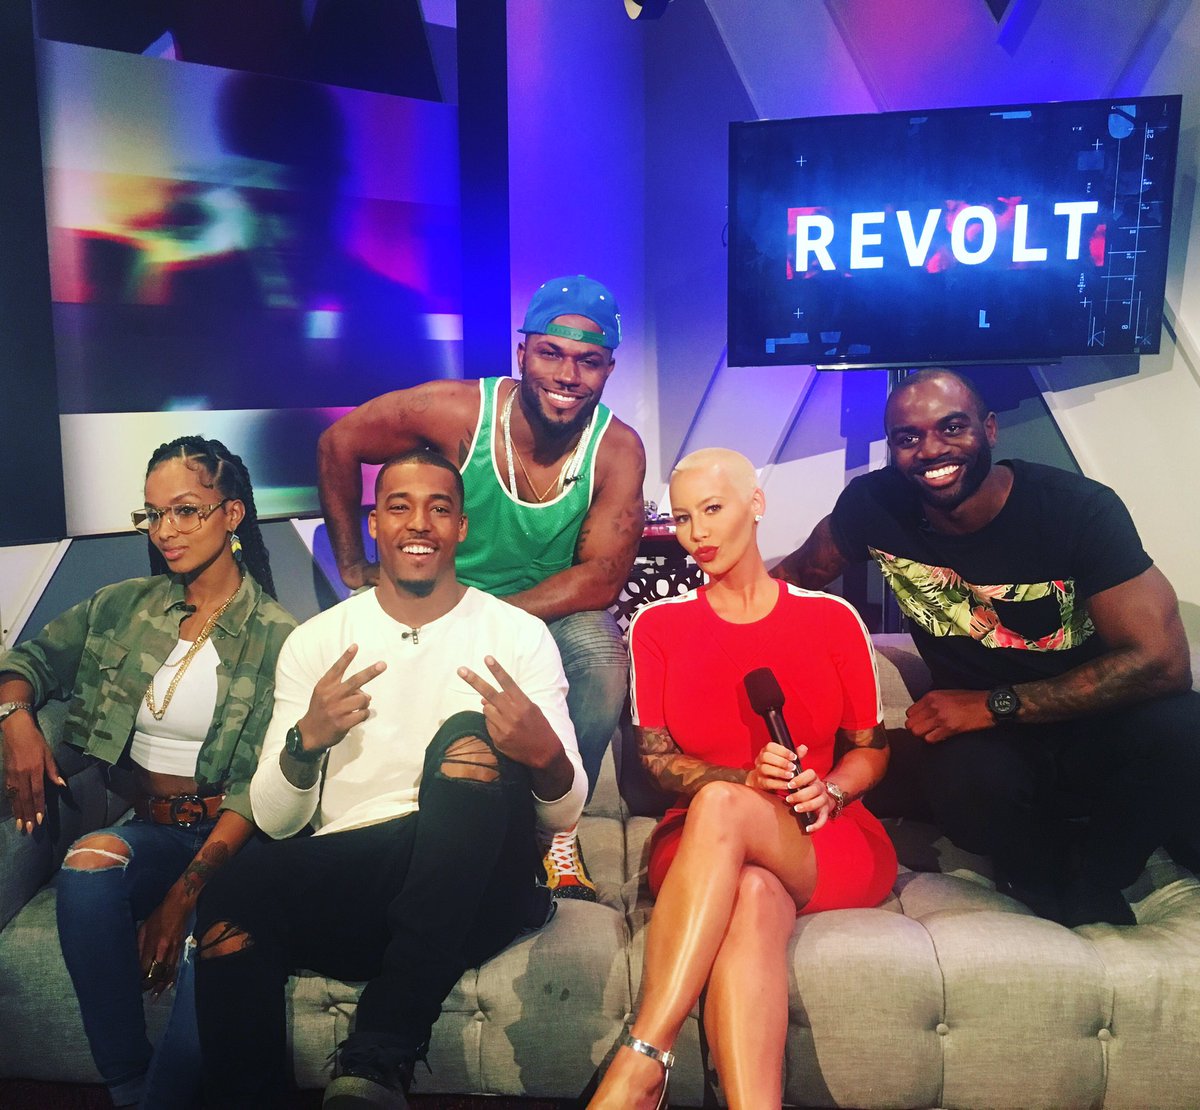 Great discussion on @RevoltTV with these amazing people ???????? https://t.co/rZPT2SJ7Rc